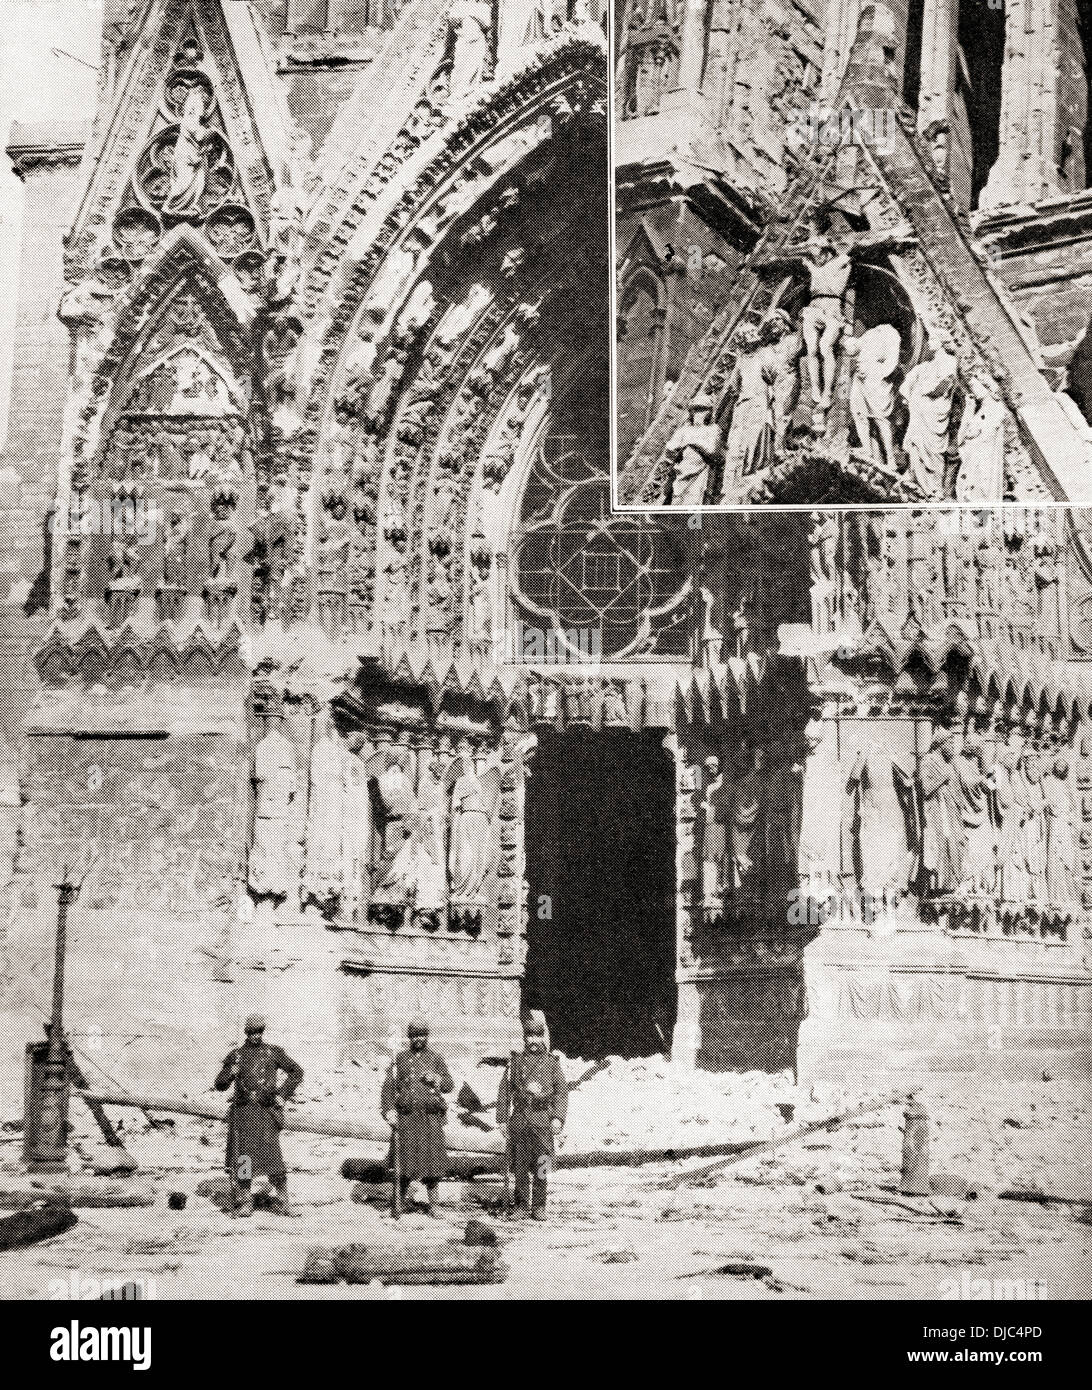 Damage done to Reims cathedral, France by German shells during WWI. From The War Illustrated Album Deluxe, published 1915. Stock Photo